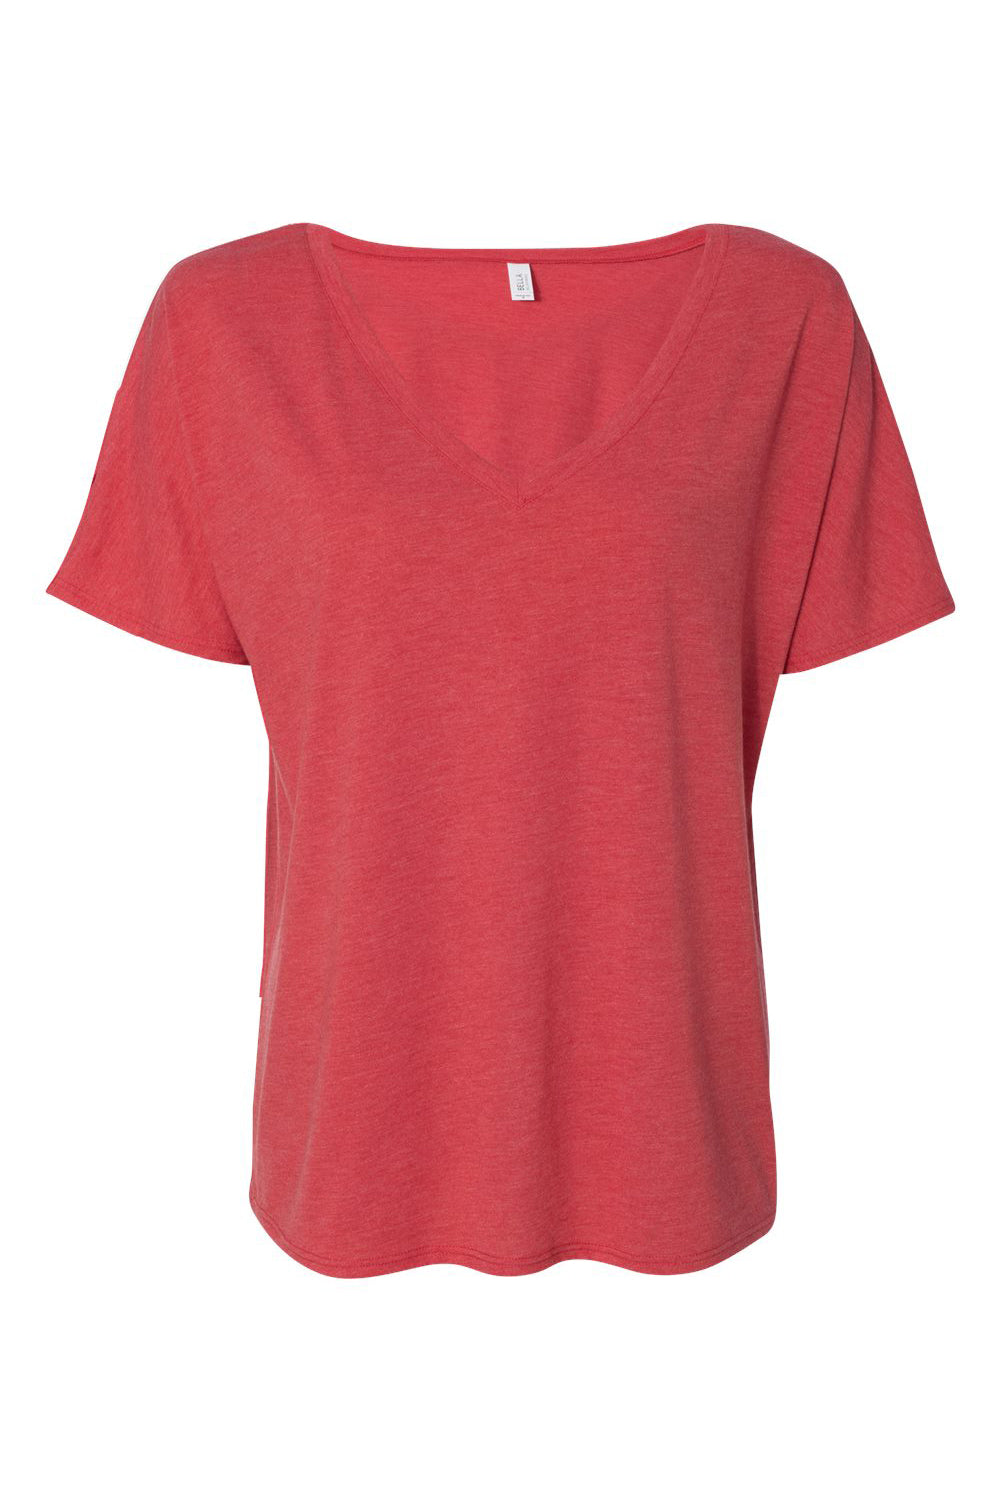 Bella + Canvas 8815 Womens Slouchy Short Sleeve V-Neck T-Shirt Red Triblend Flat Front